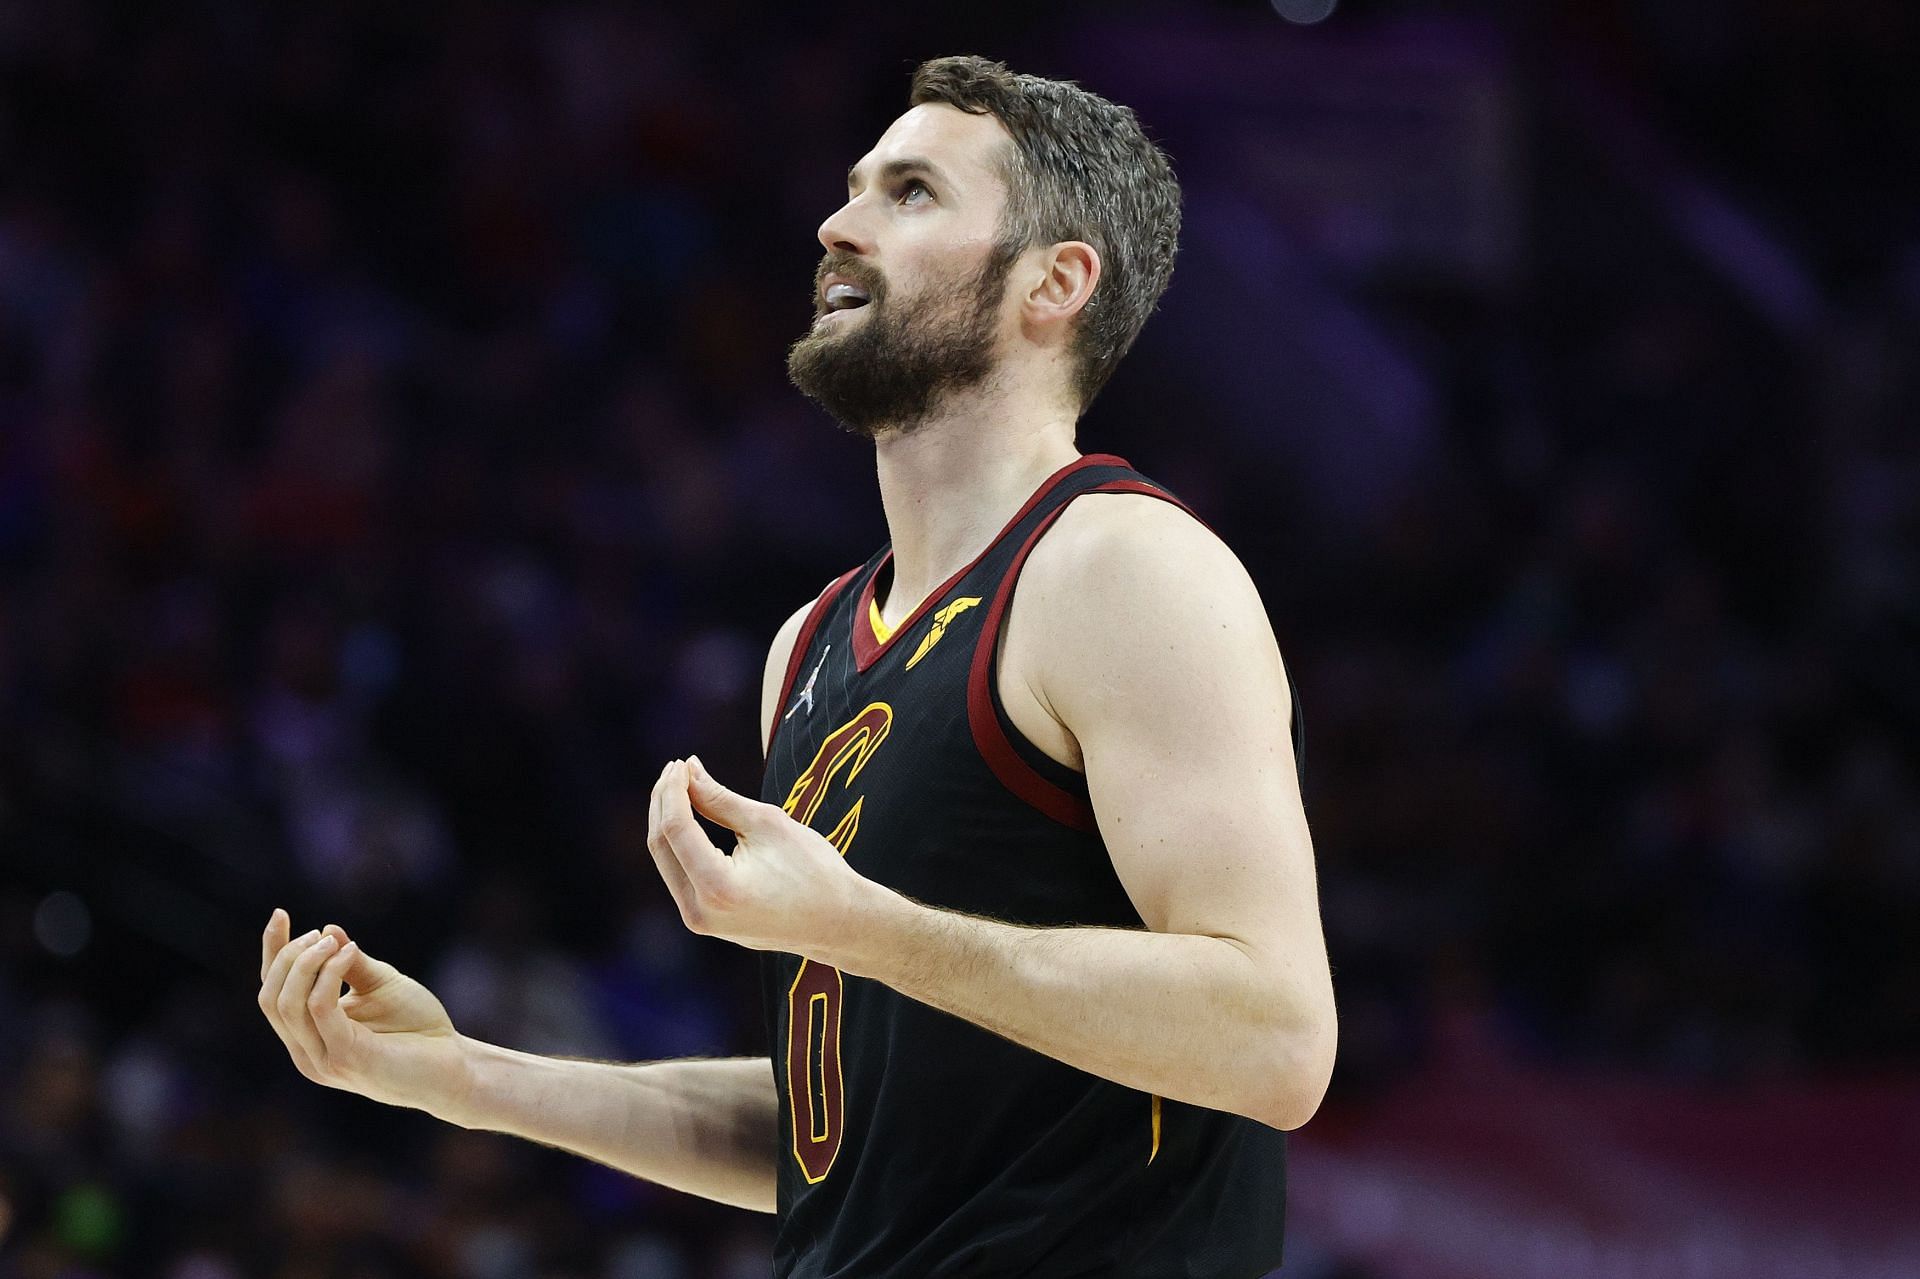 Kevin Love of the Cleveland Cavaliers.